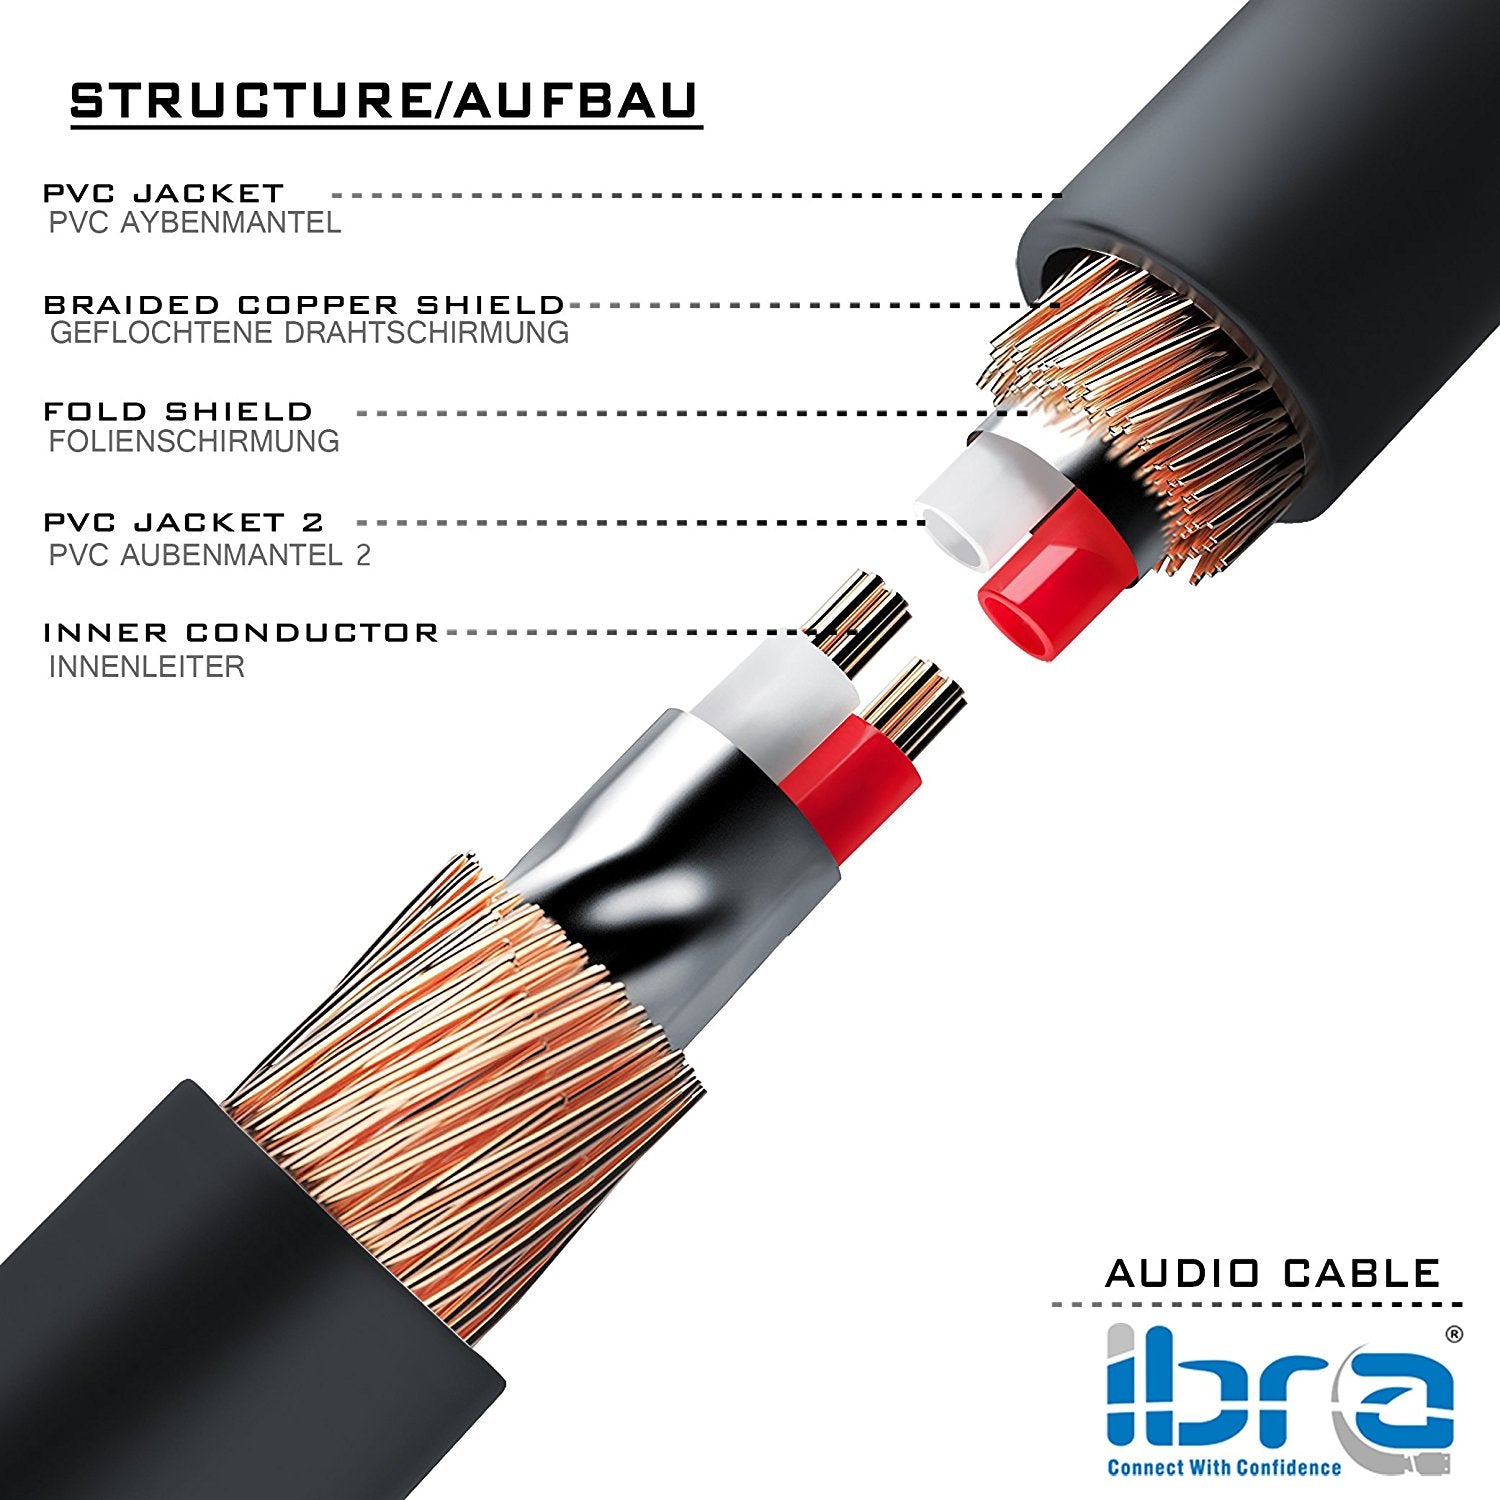 Aux Cable 5M 3.5mm Stereo Pro Auxiliary Audio Cable - for Beats Headphones Apple iPod iPhone iPad Samsung LG Smartphone MP3 Player Home / Car etc - IBRA Black